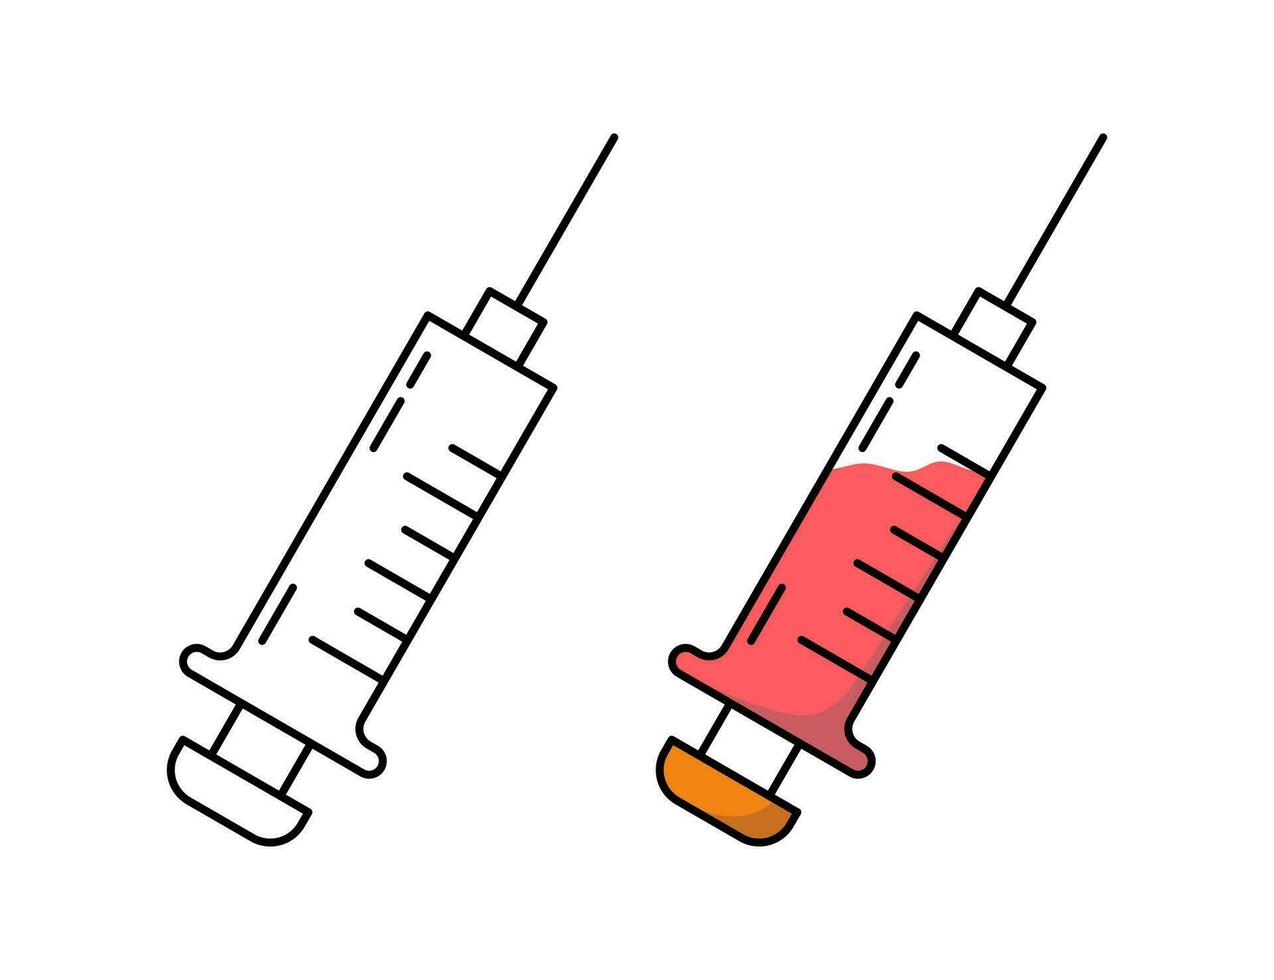 Syringe icon vector illustration. Doctors often use syringes to prevent and treat malignant diseases.